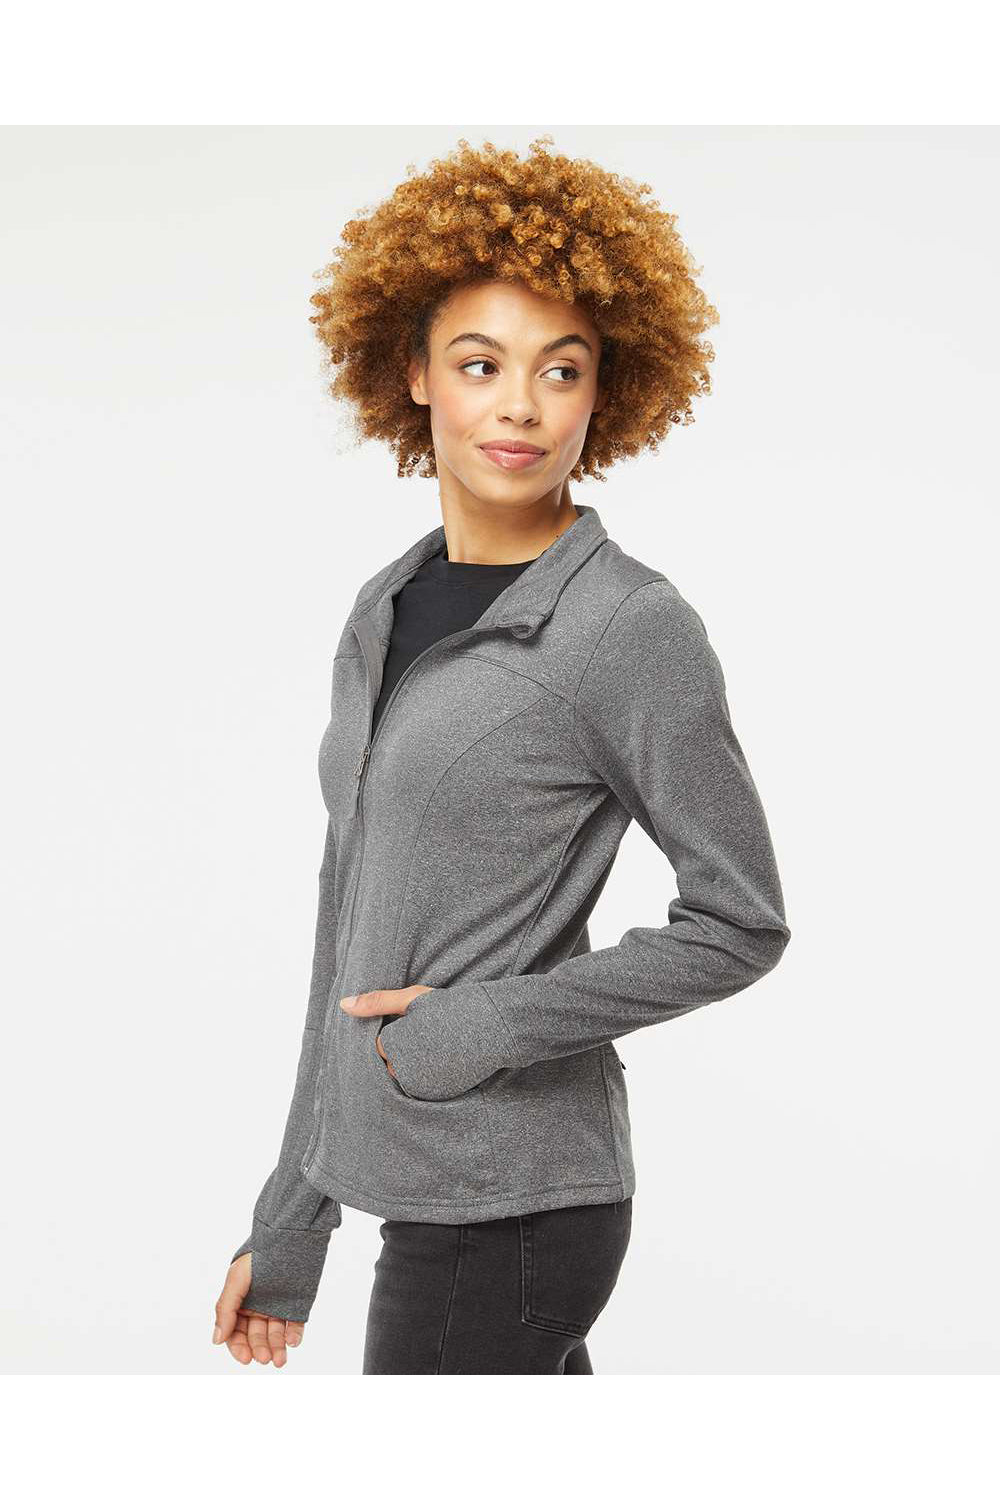 Independent Trading Co. EXP60PAZ Womens Poly Tech Full Zip Track Jacket Heather Gunmetal Grey Model Side